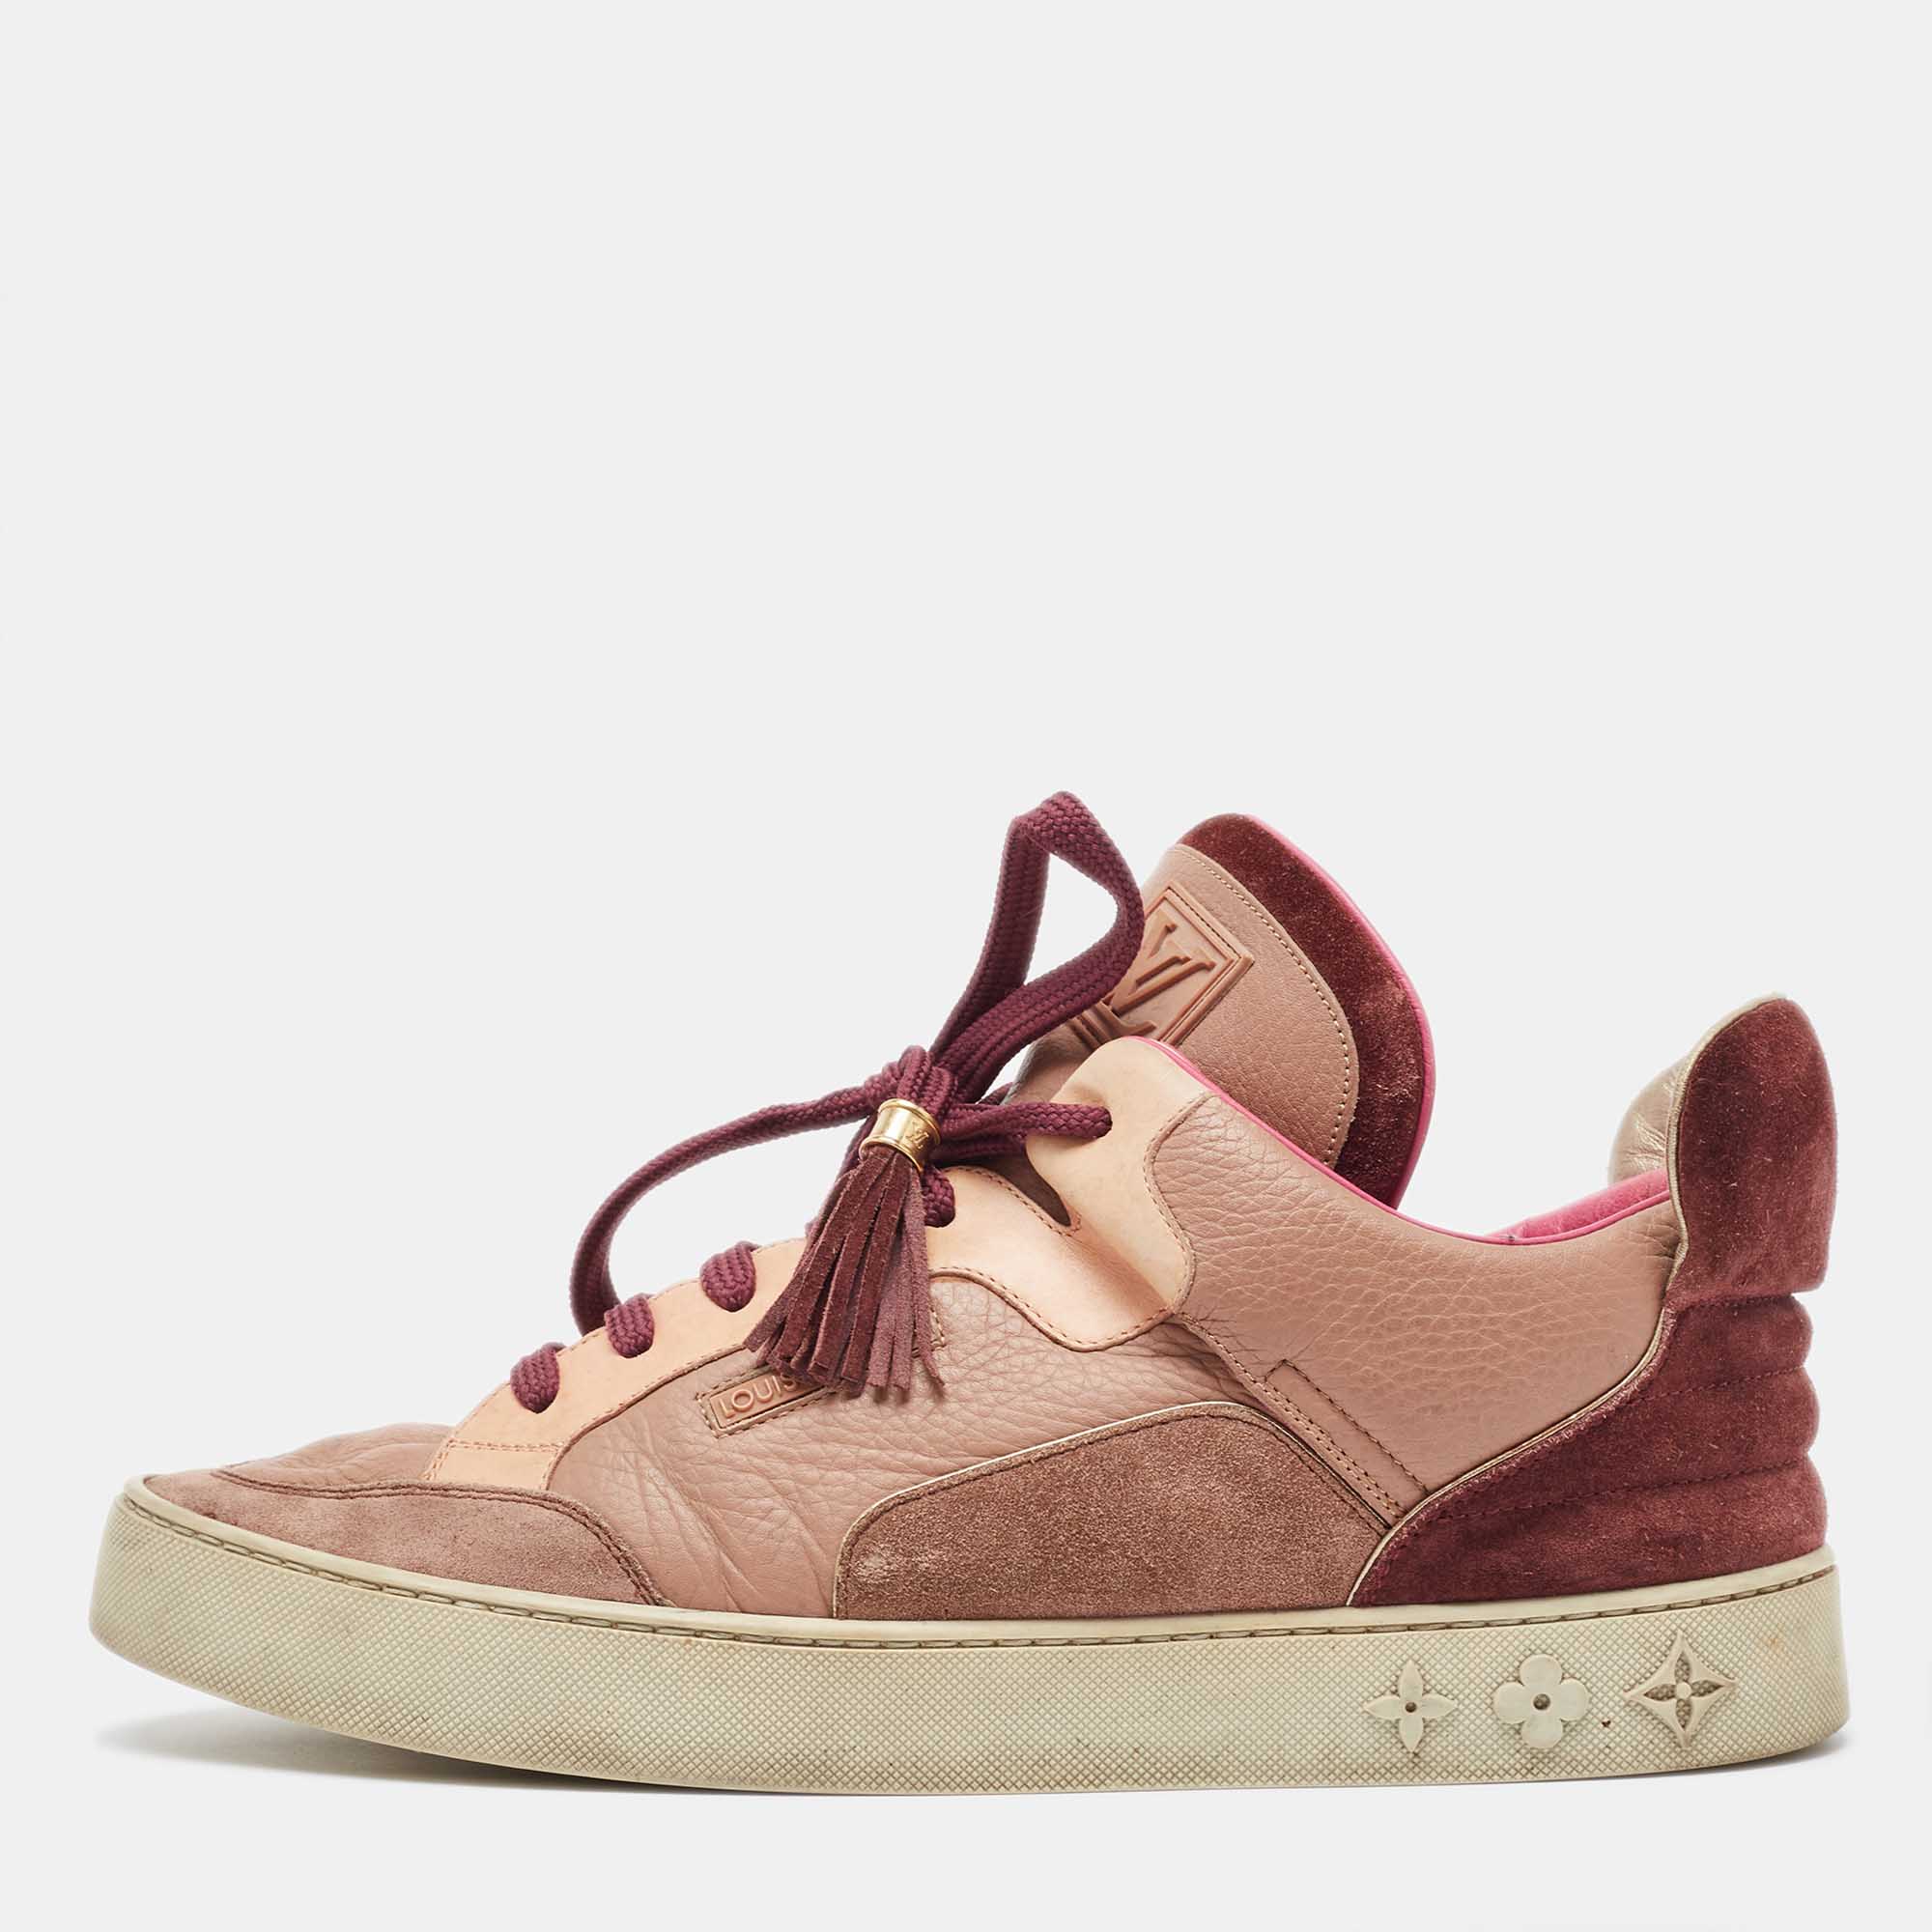 Louis vuitton x kanye west pink/beige leather and suede don patchwork low top sneakers size 42.5